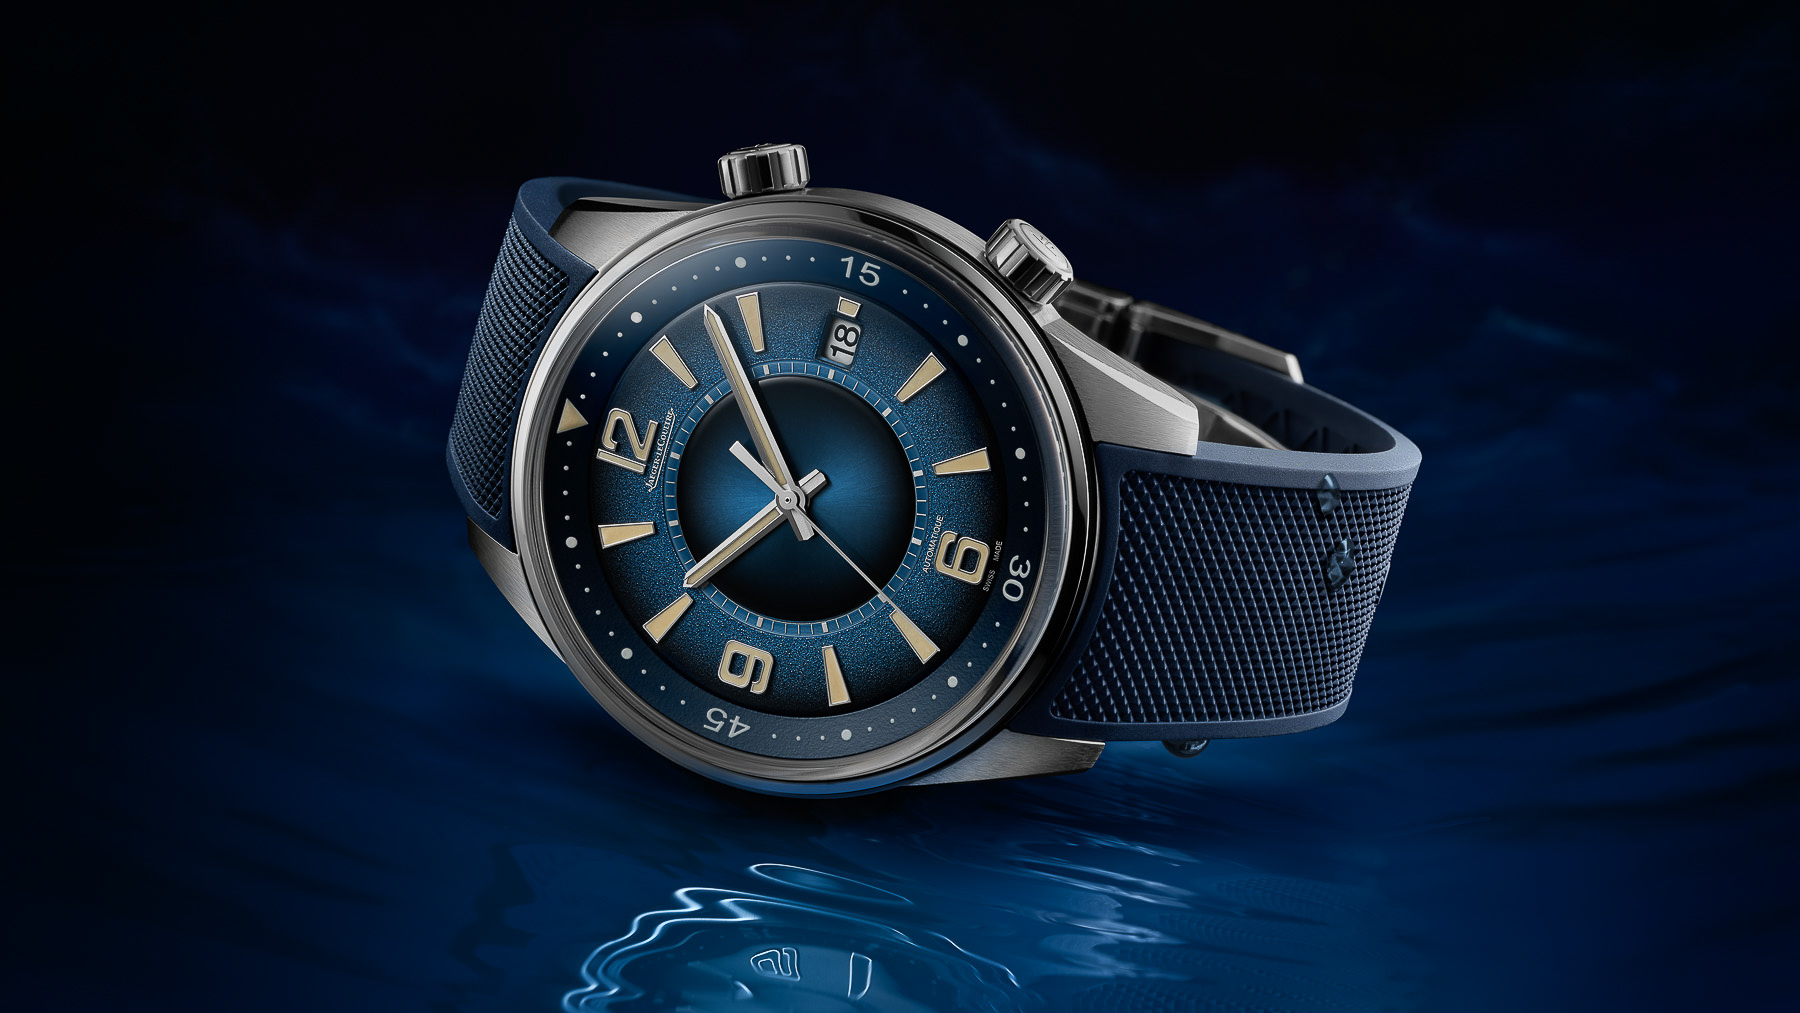 Jaeger-LeCoultre Polaris Date Limited Edition Exclusive to North America